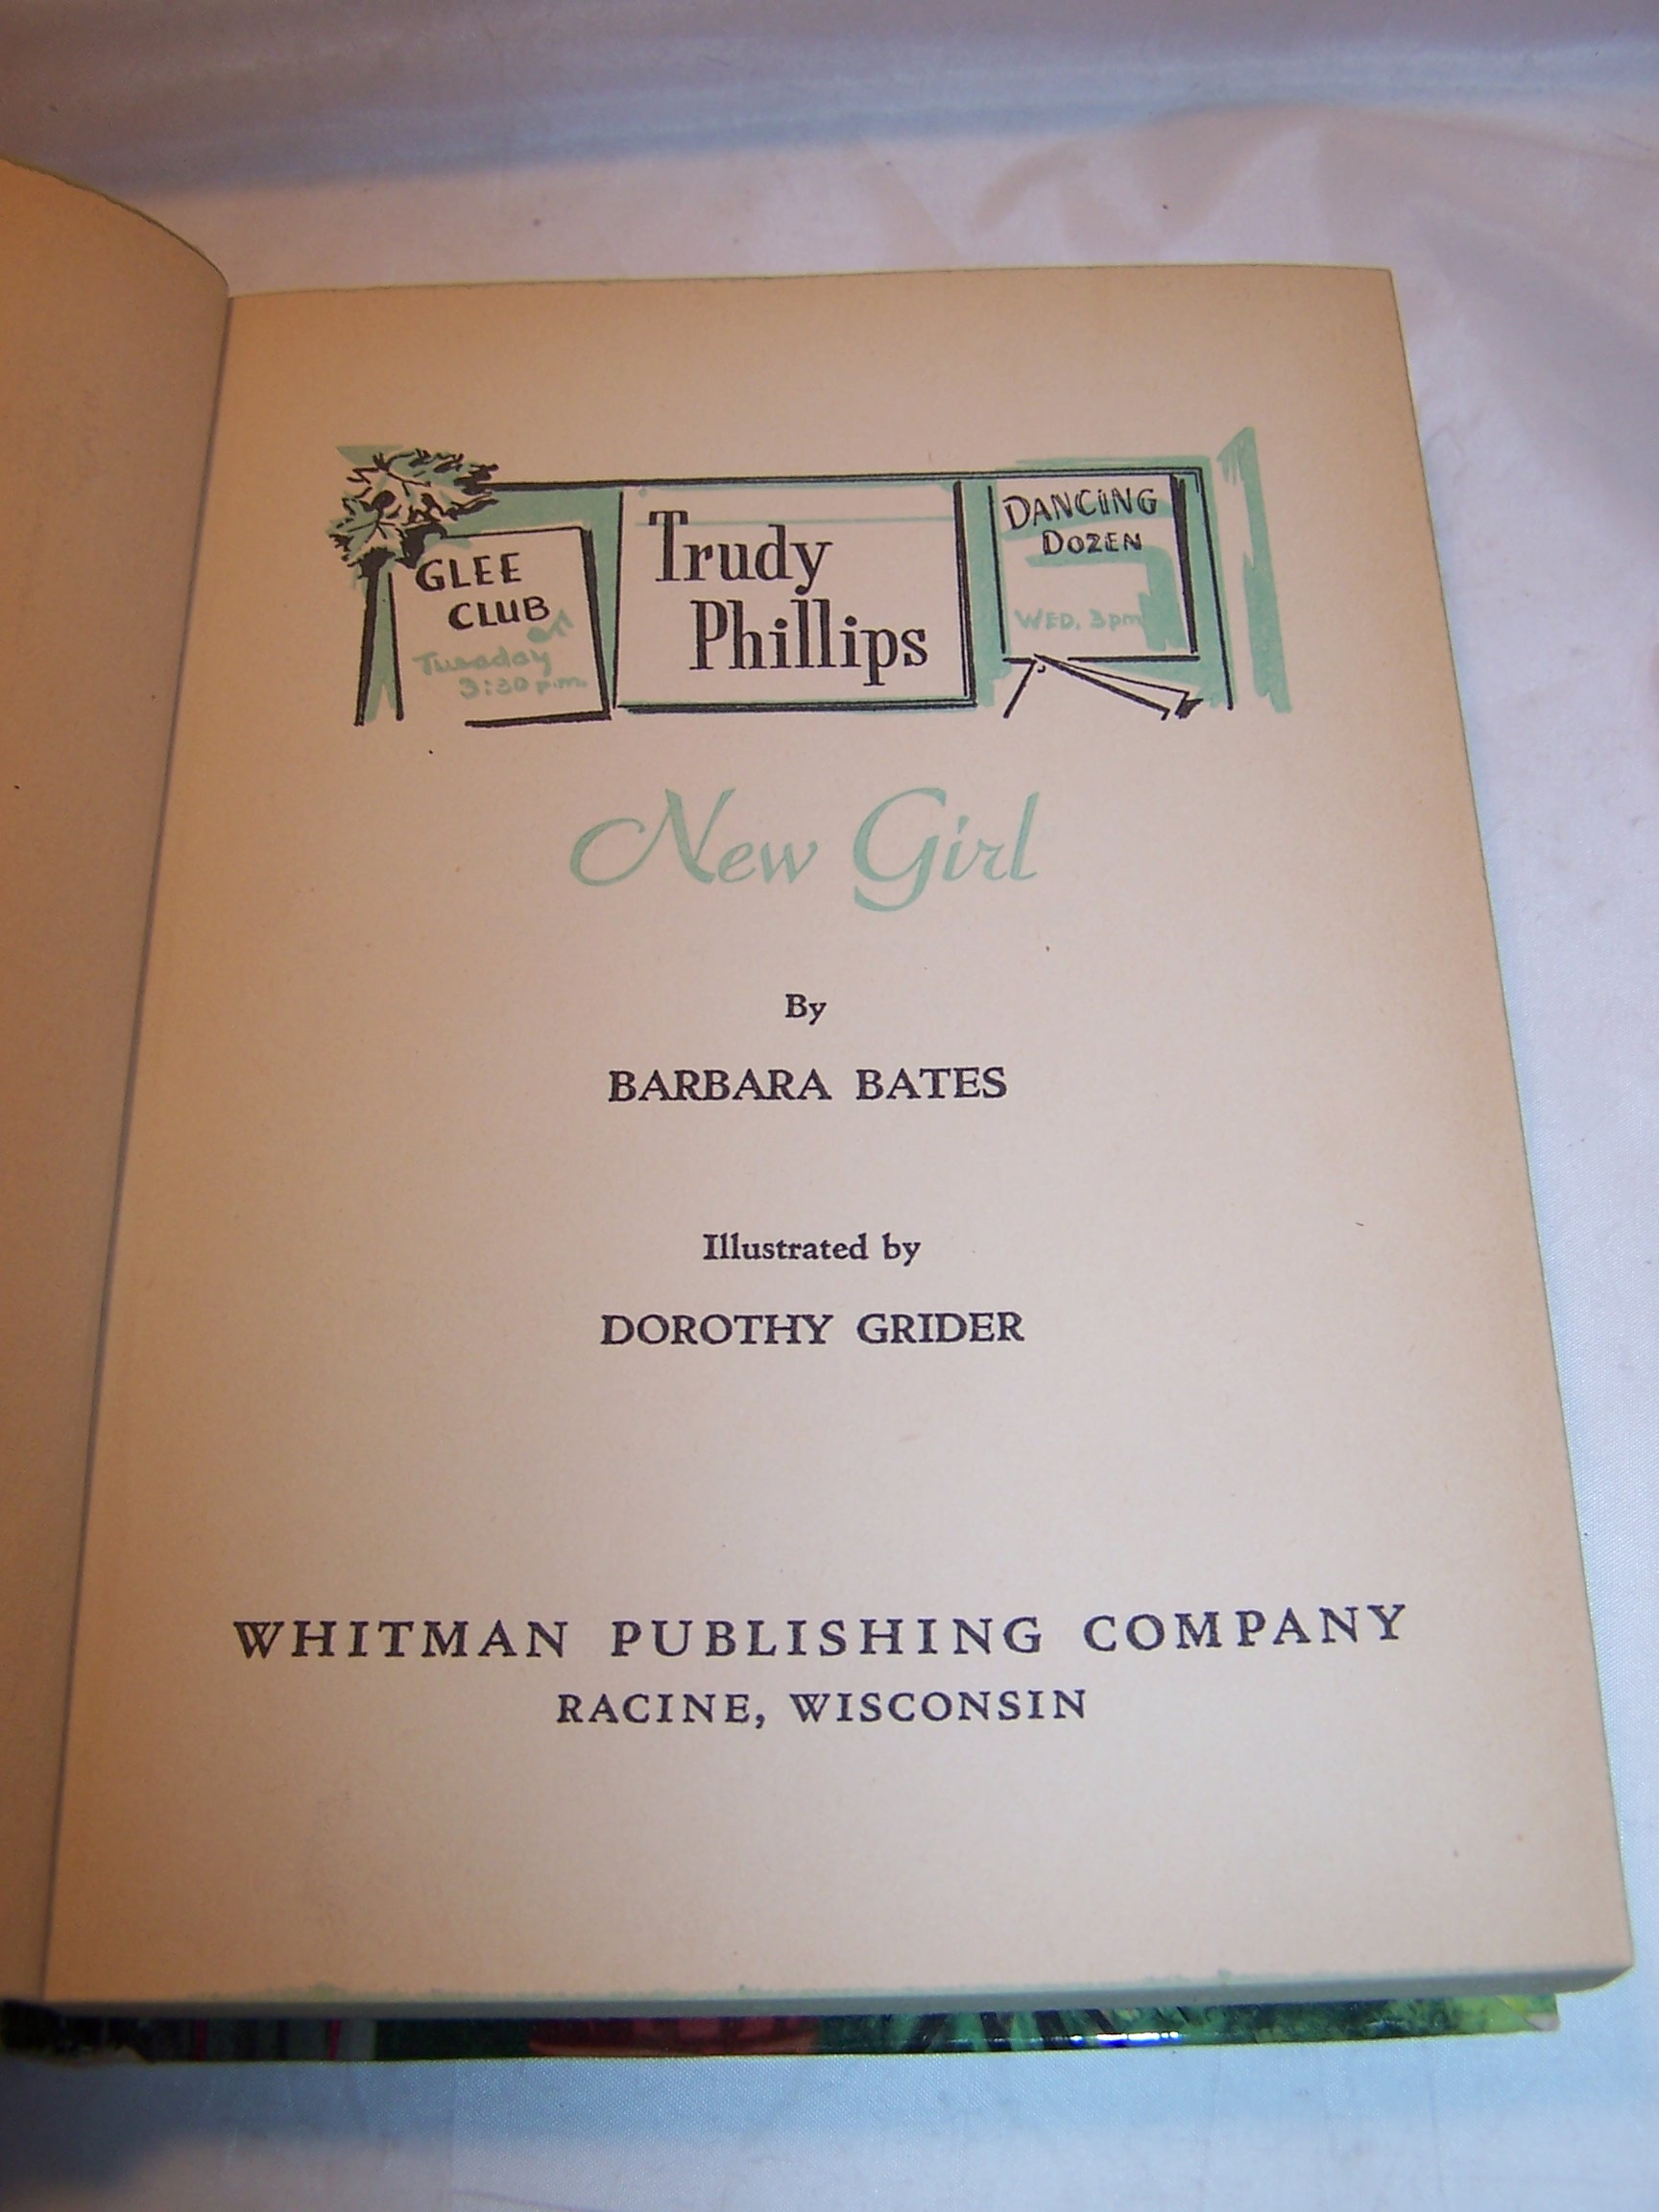 Image 2 of Trudy Phillips, New Girl, Barbara Bates, First Edition